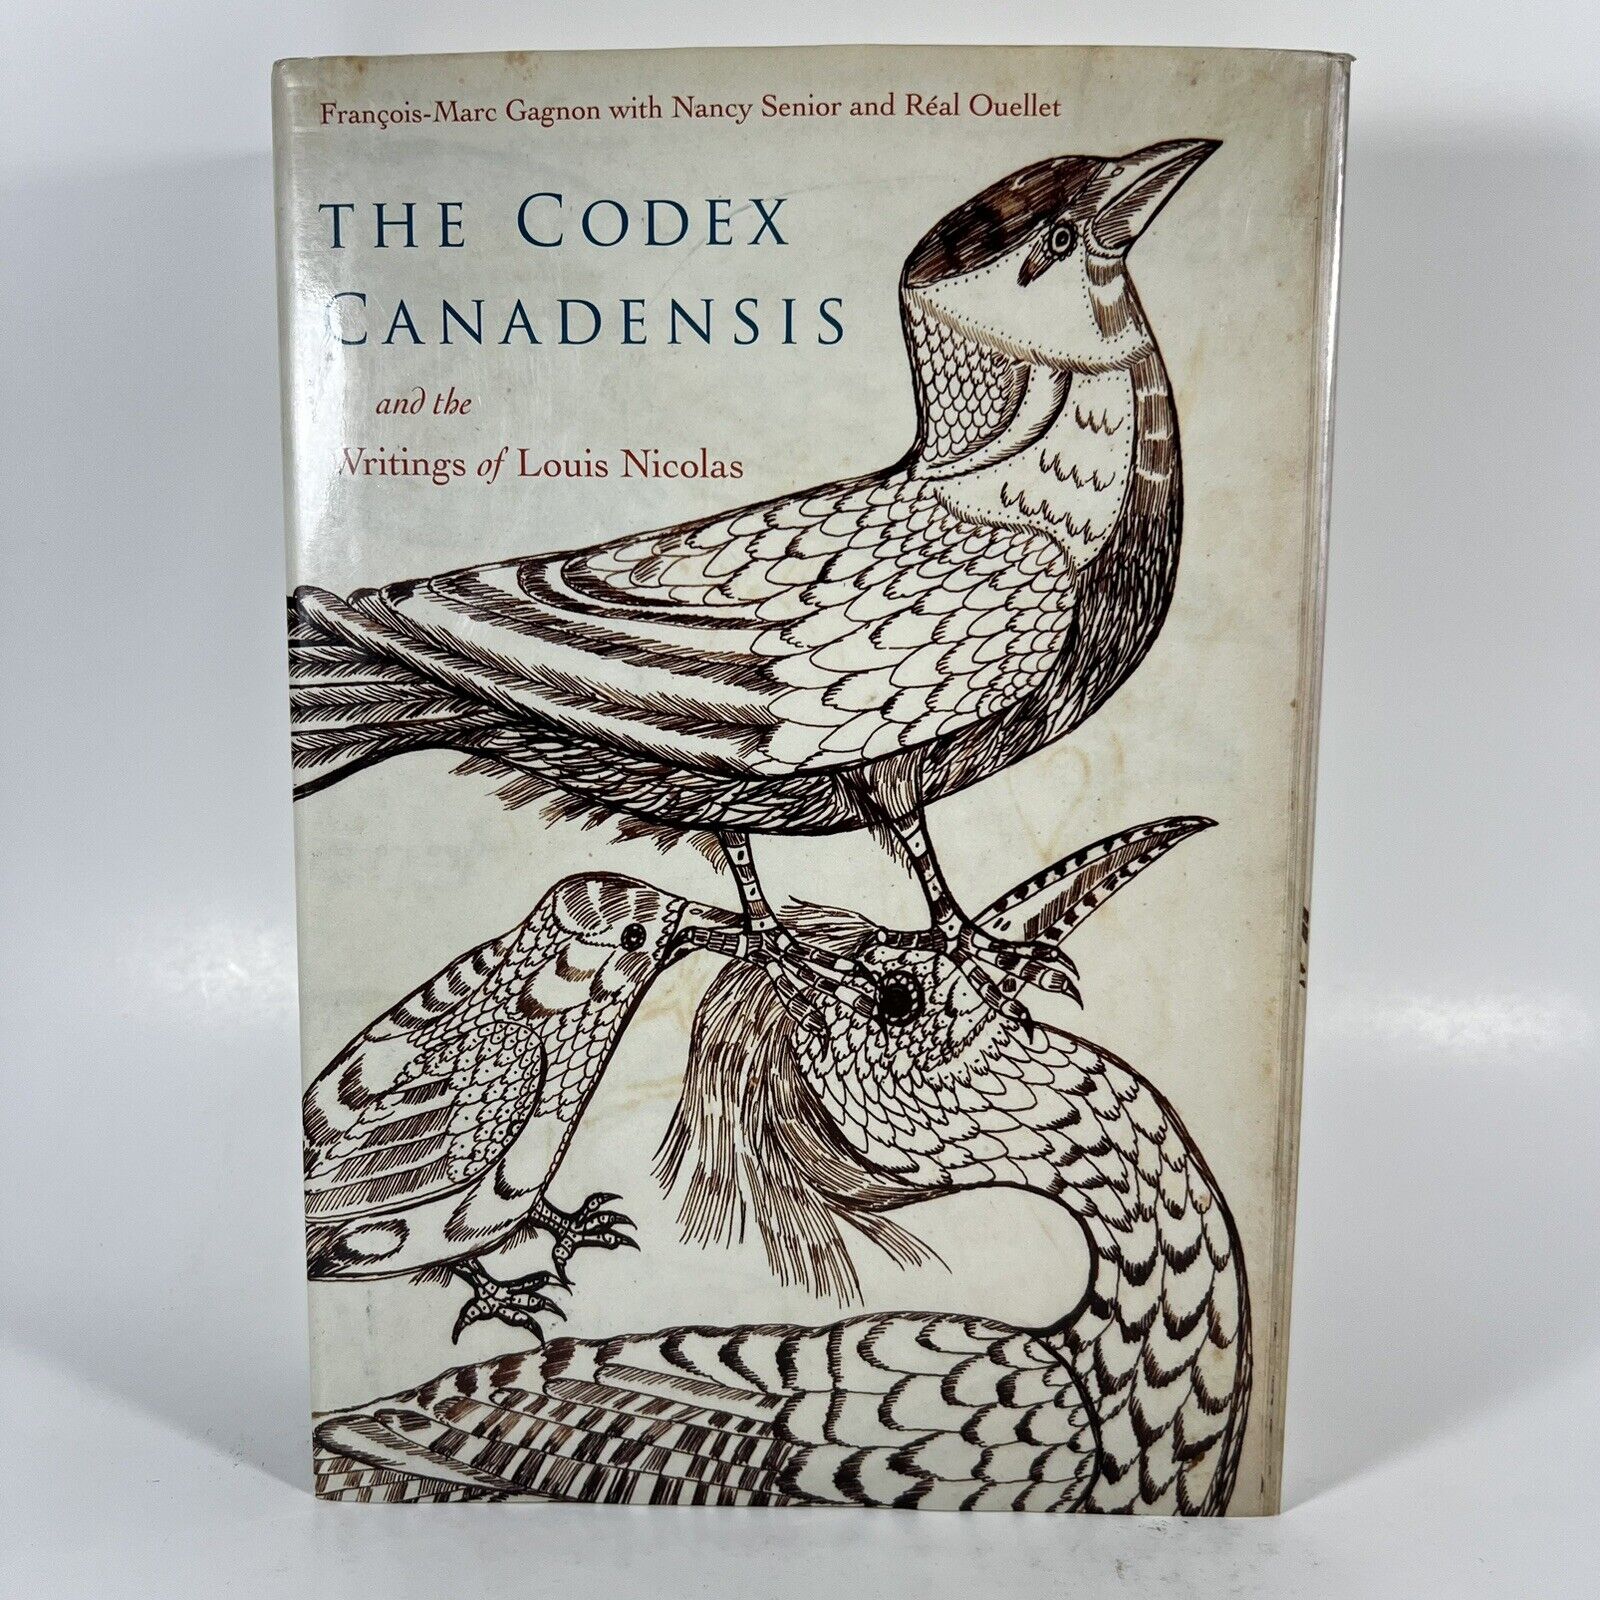 The Codex Canadensis and the Writings of Louis Nicolas: The Natural History of